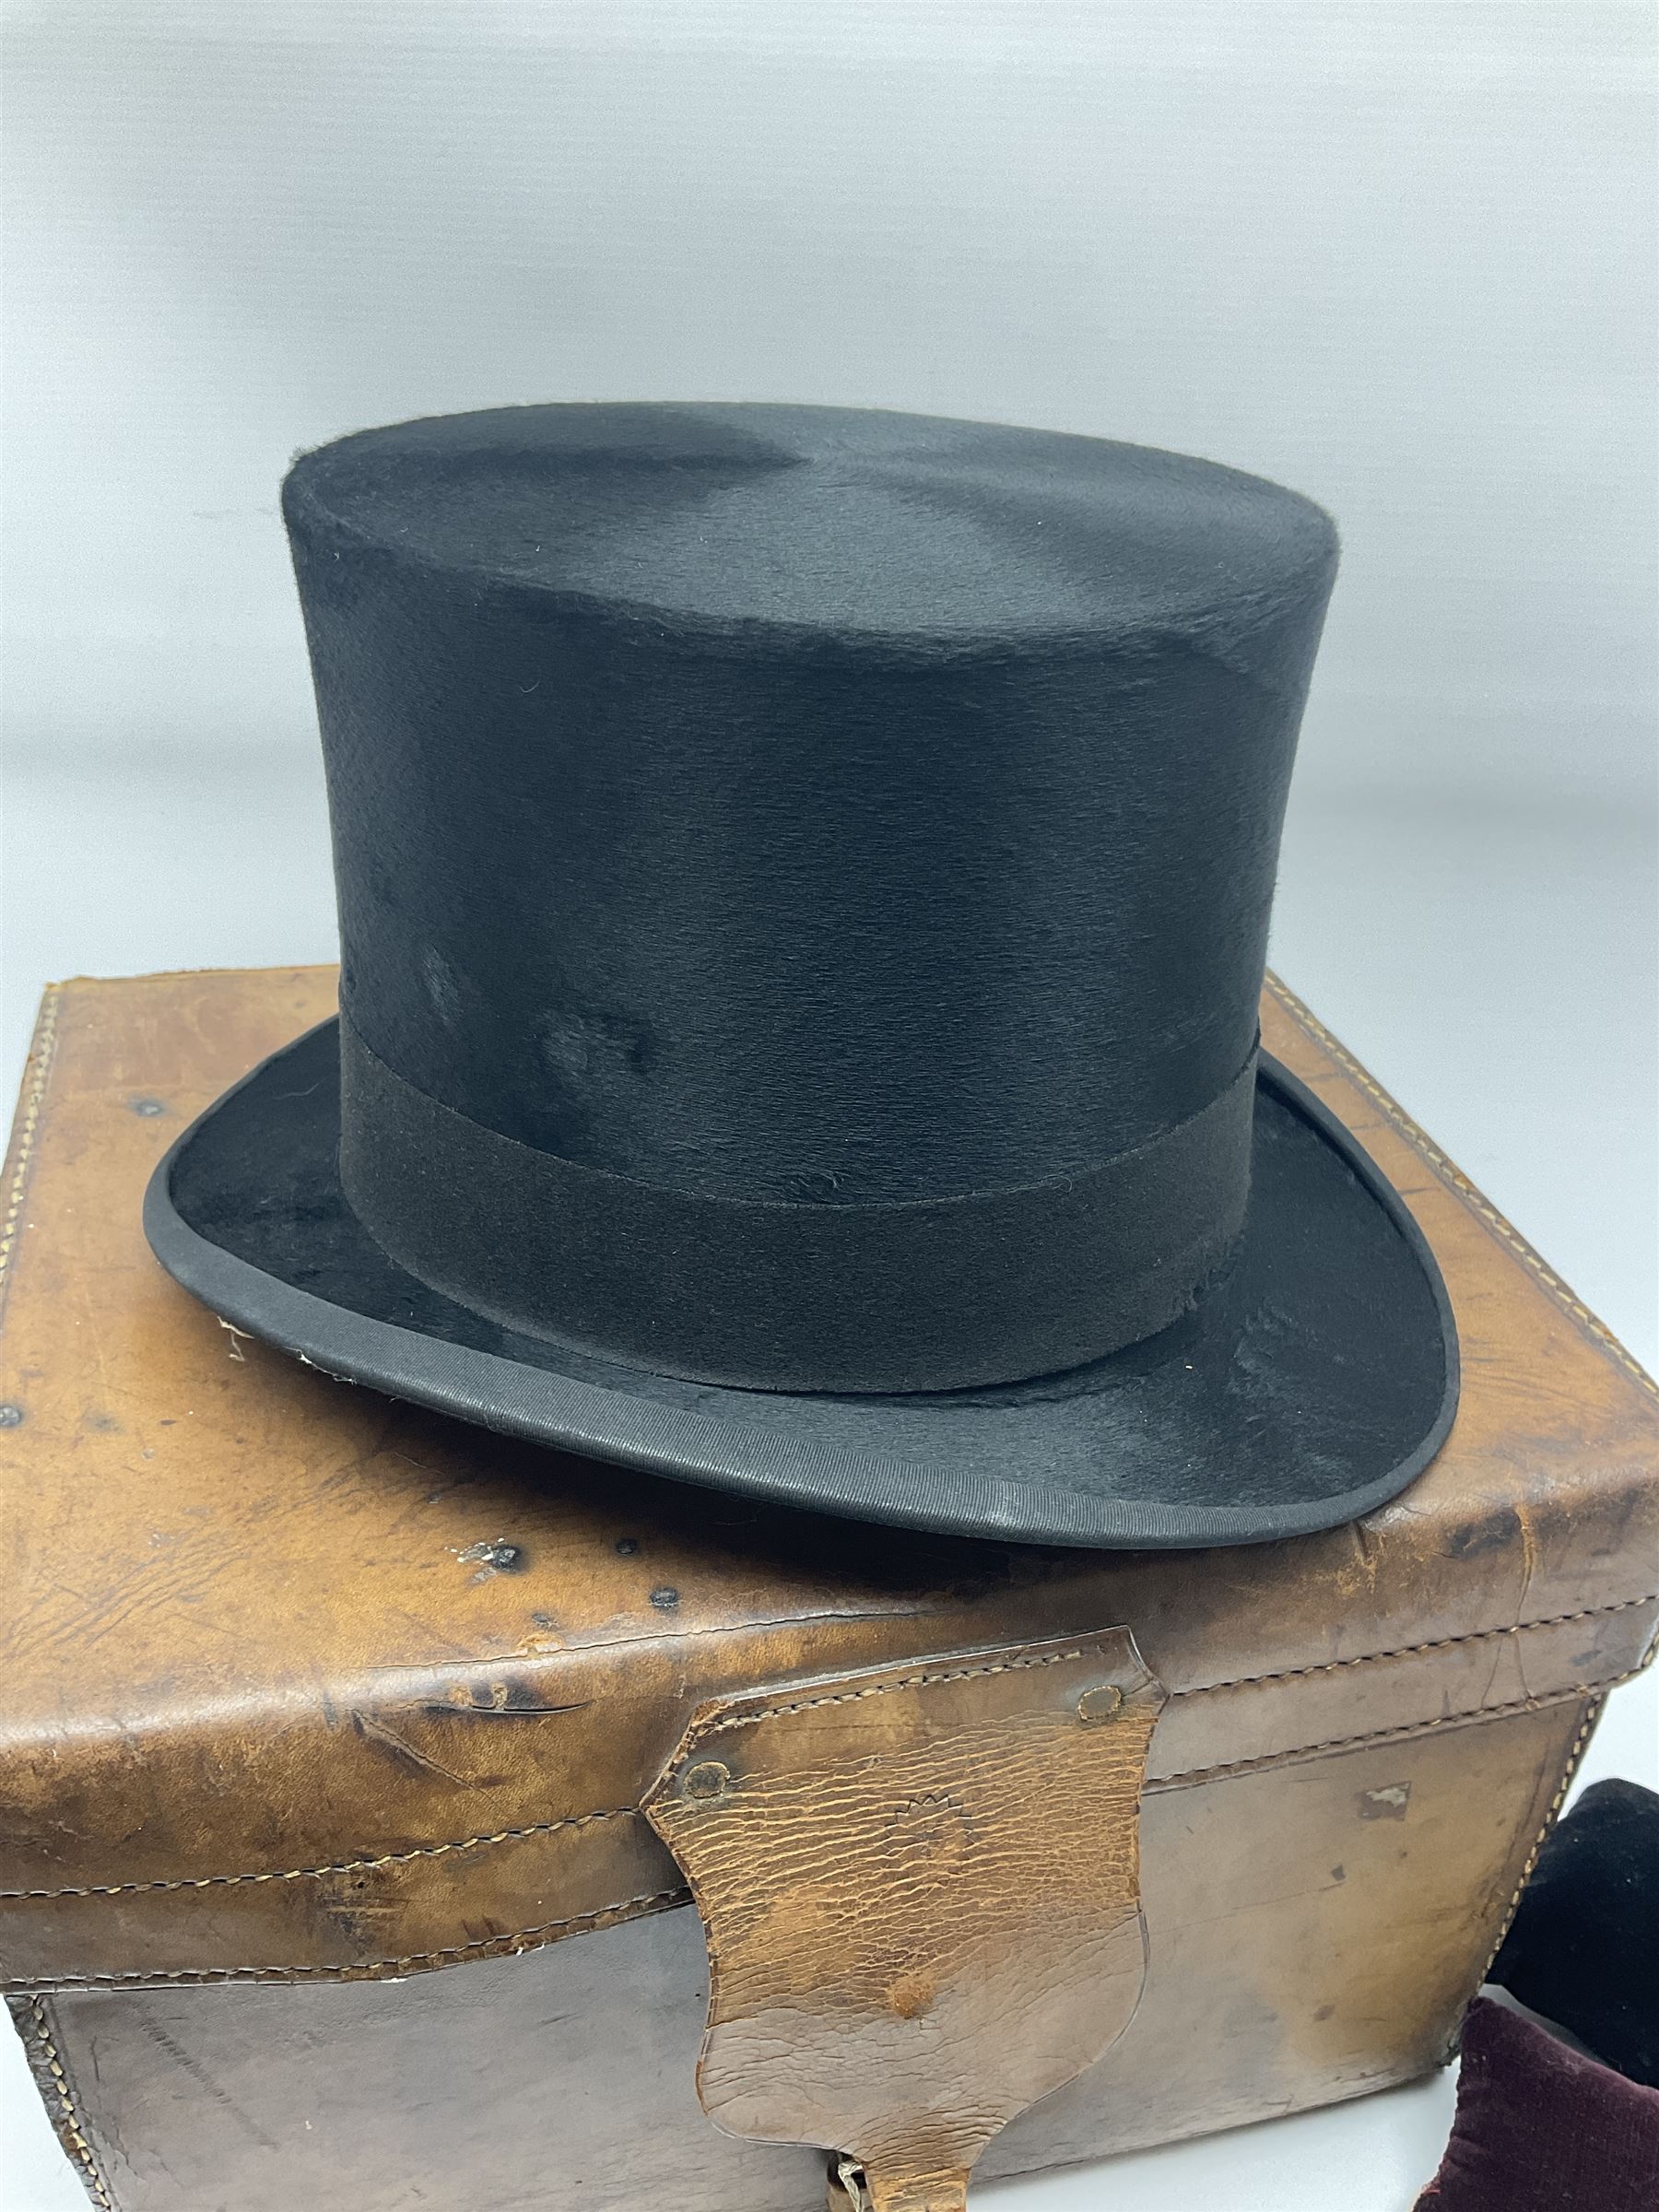 Gentlemen's black brushed silk top hat by Henry Heath of London housed in a leather case with dark r - Image 8 of 9